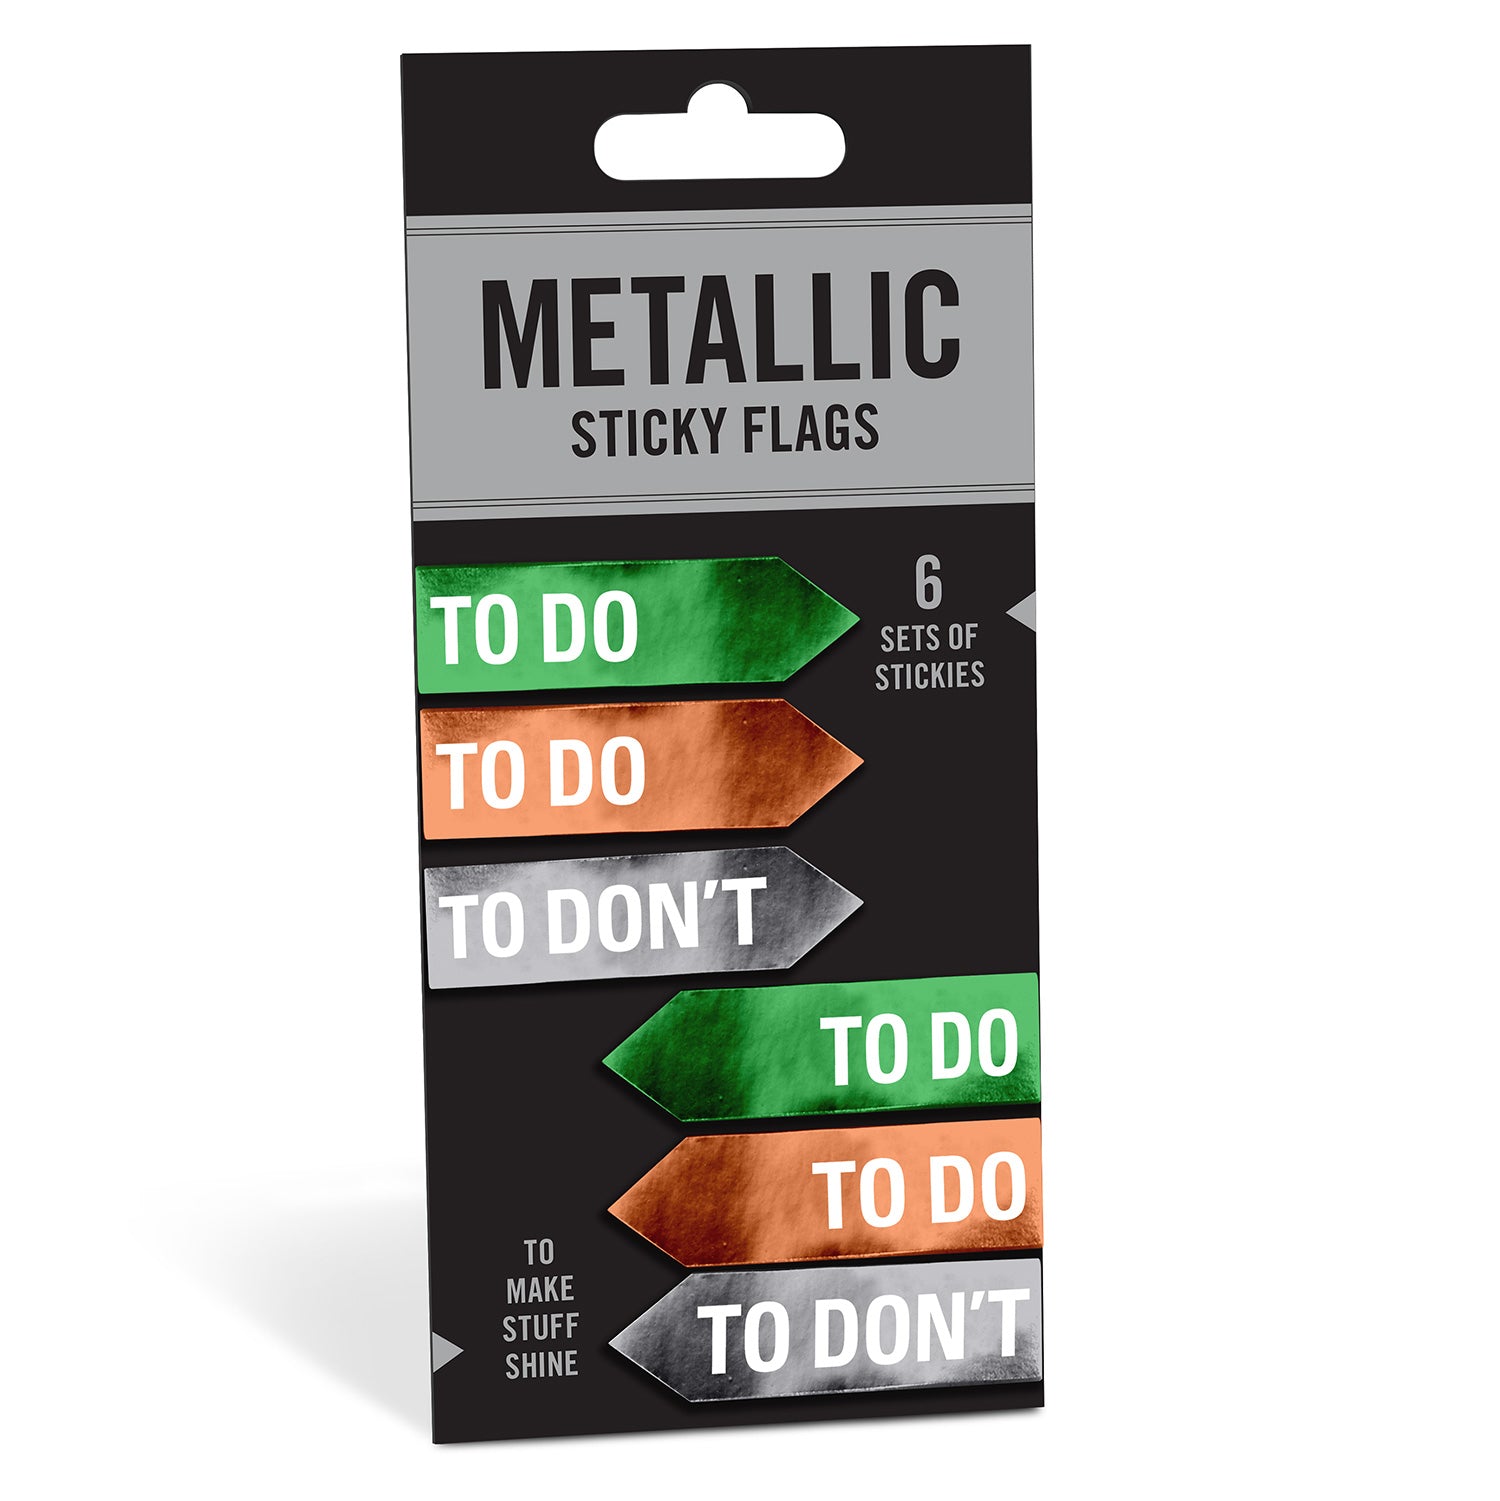 To Do / To Don't No Metallic Sticky Flags